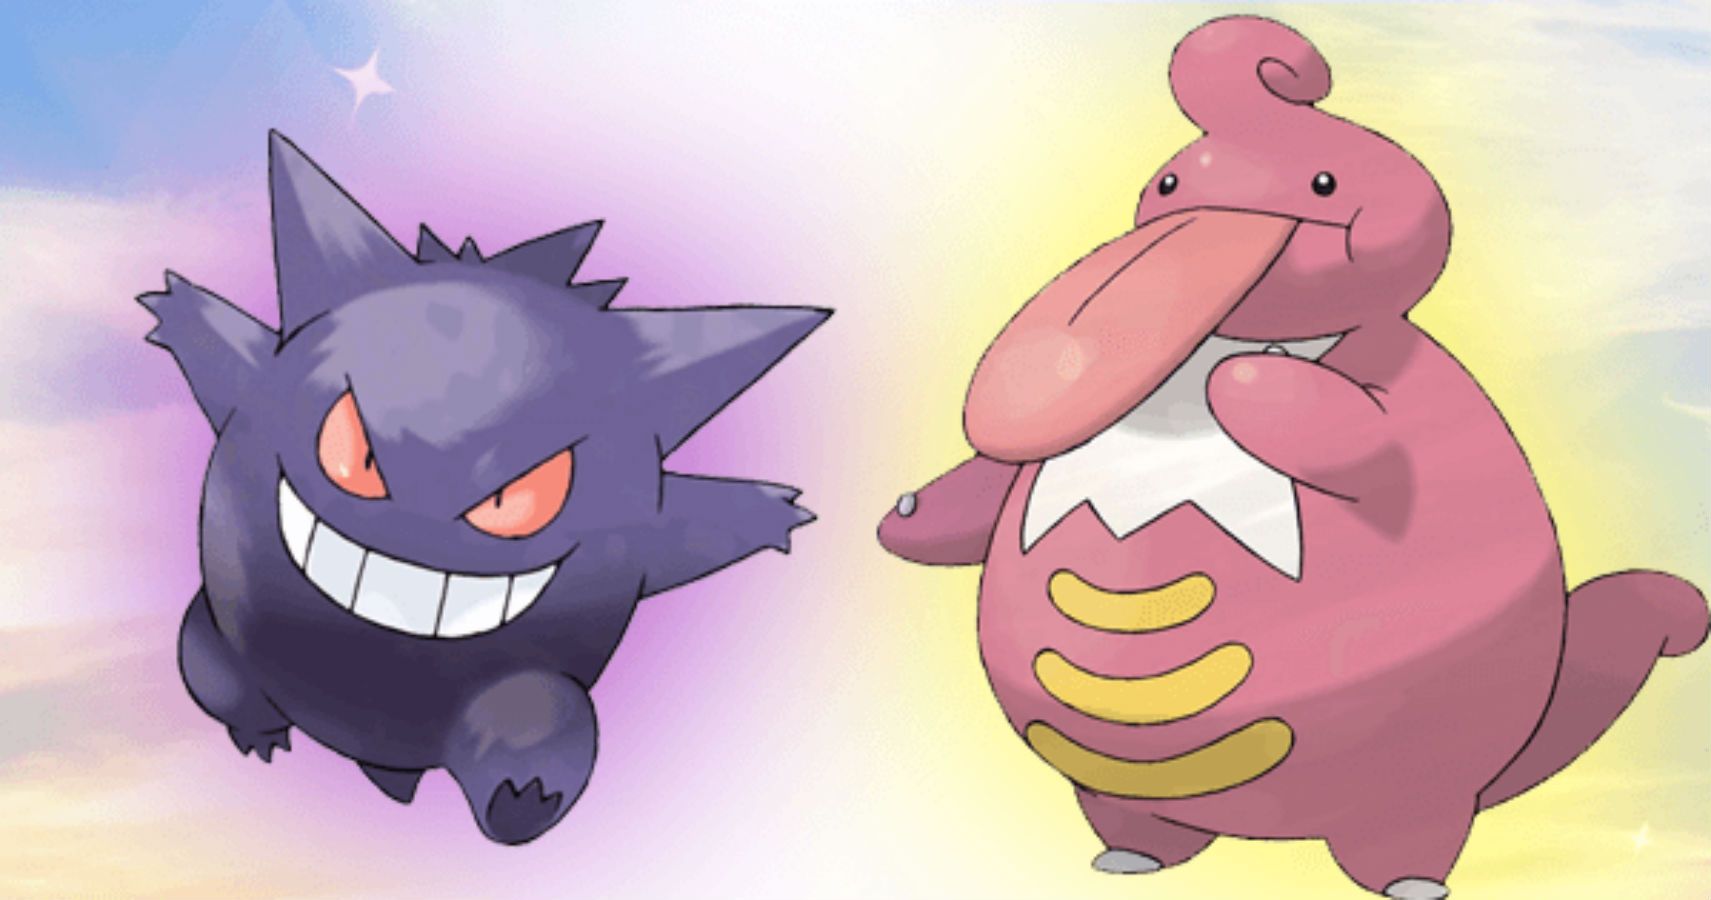 Pokémon GO Which Moves Evolved Gengar & Lickilicky Will Learn During Upcoming Raid Events